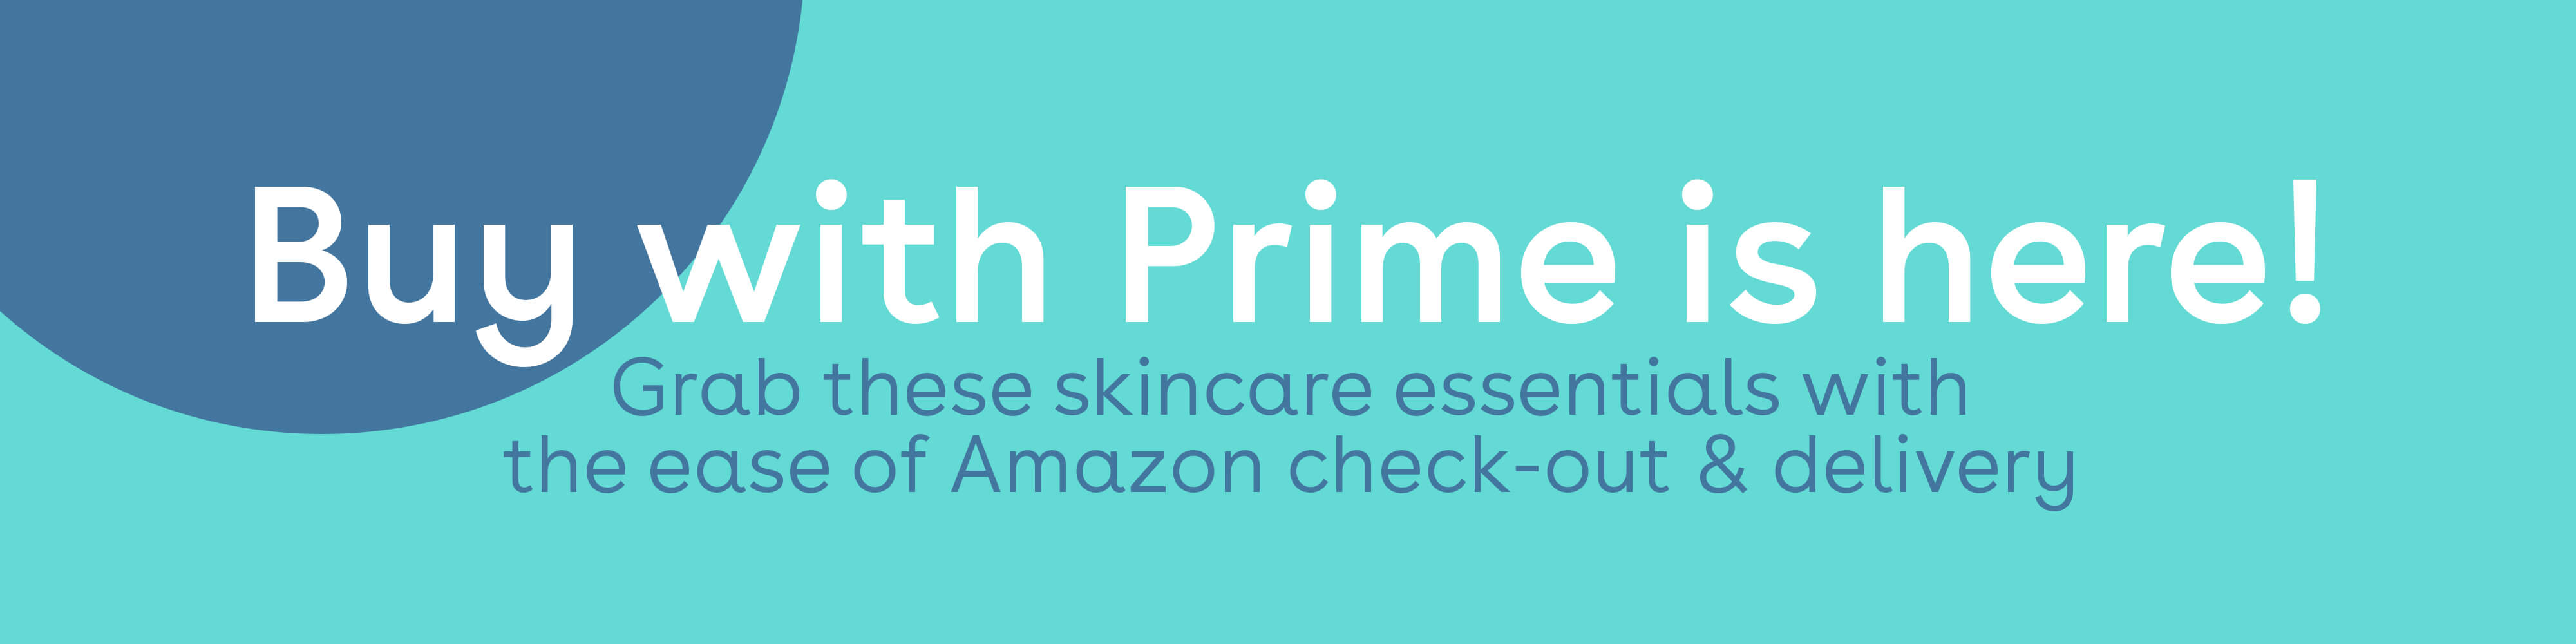 Buy with Prime is here! Grab these skincare essentials with the ease of Amazon check-out and delivery.